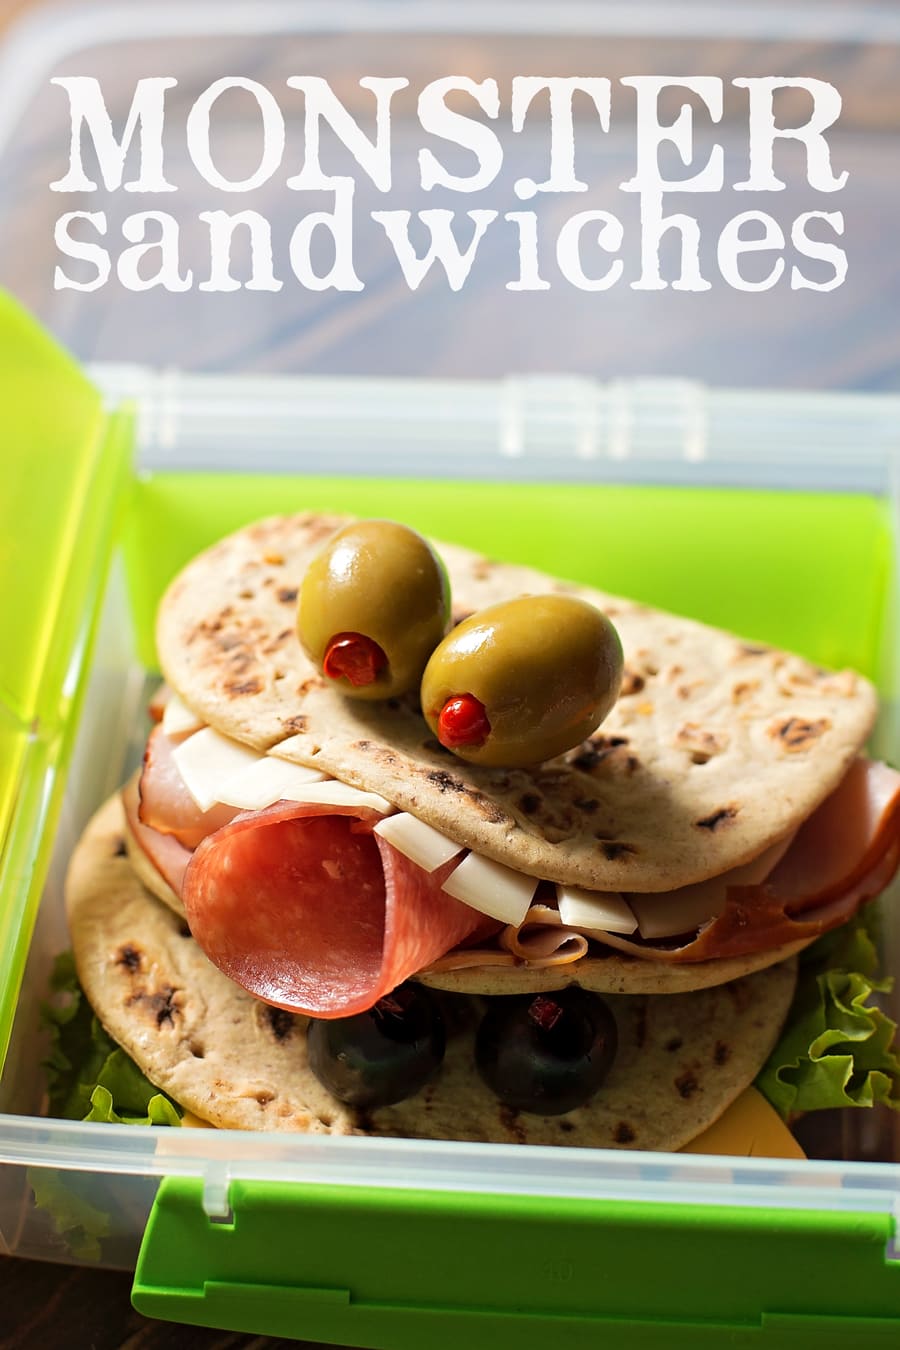 Flat out monster sandwiches with olive eyes